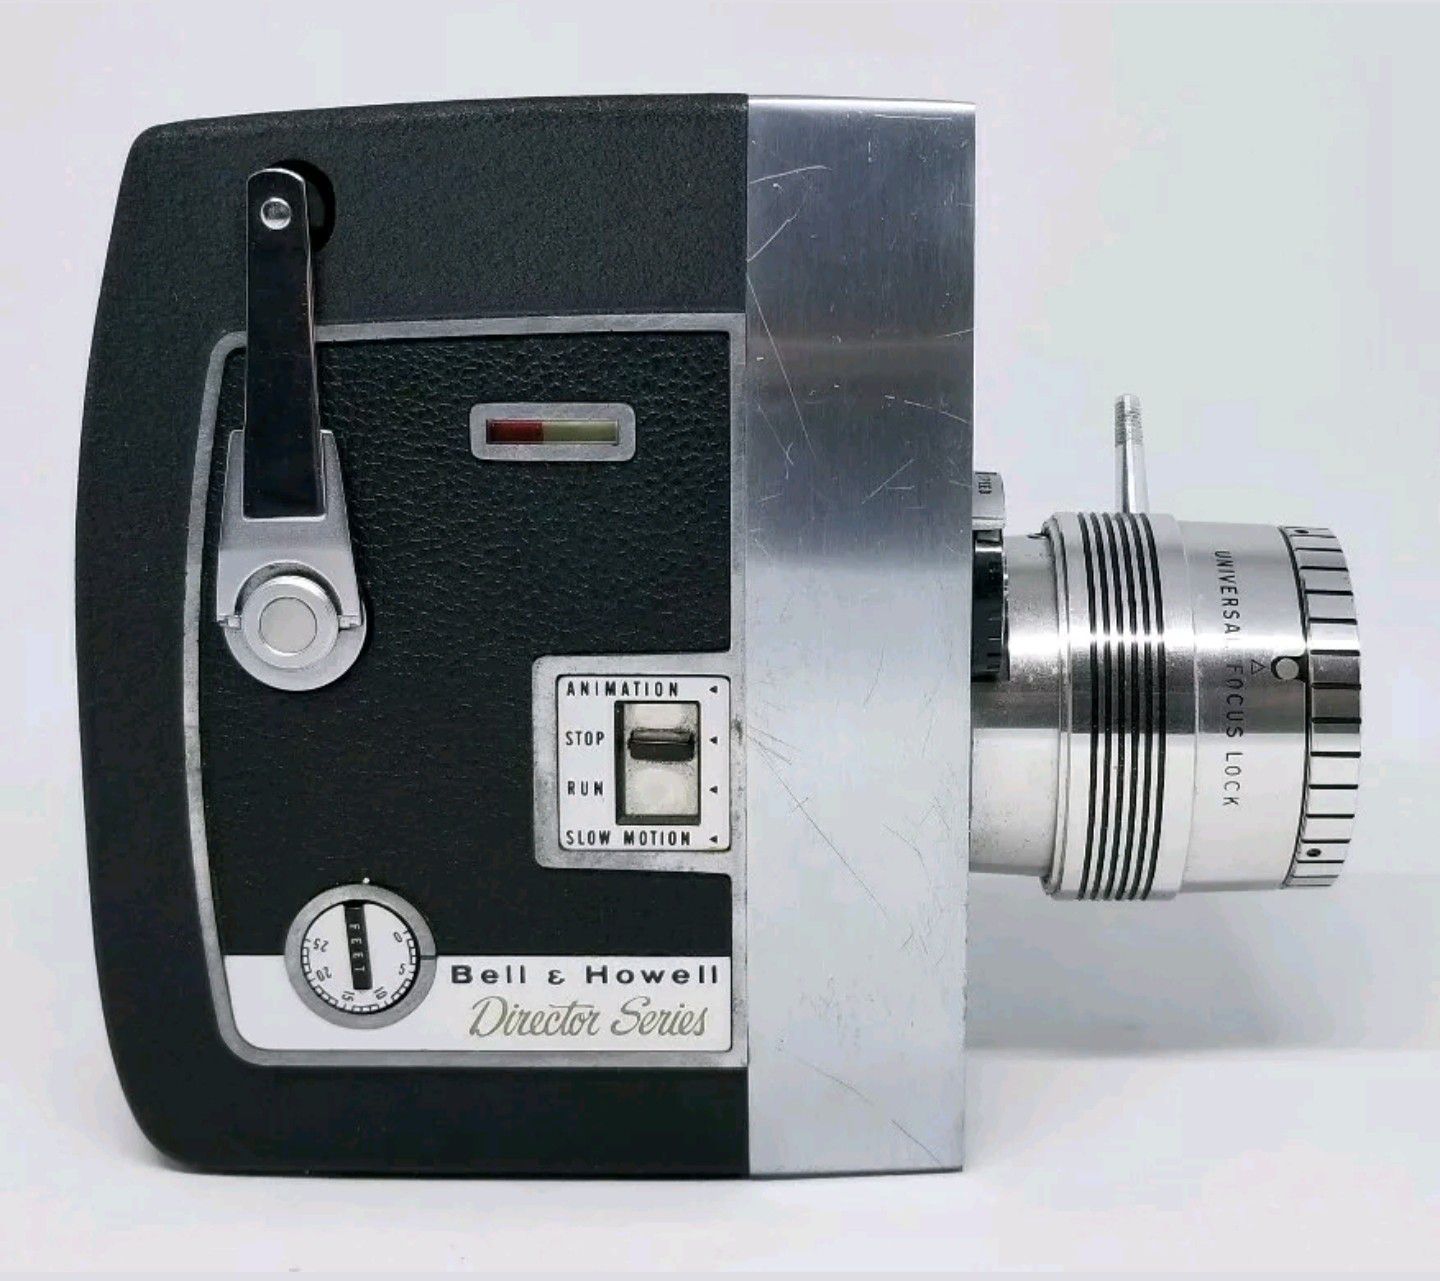 Vintage Bell & Howell Director Series Zoomatic 8mm Movie Camera Model 424